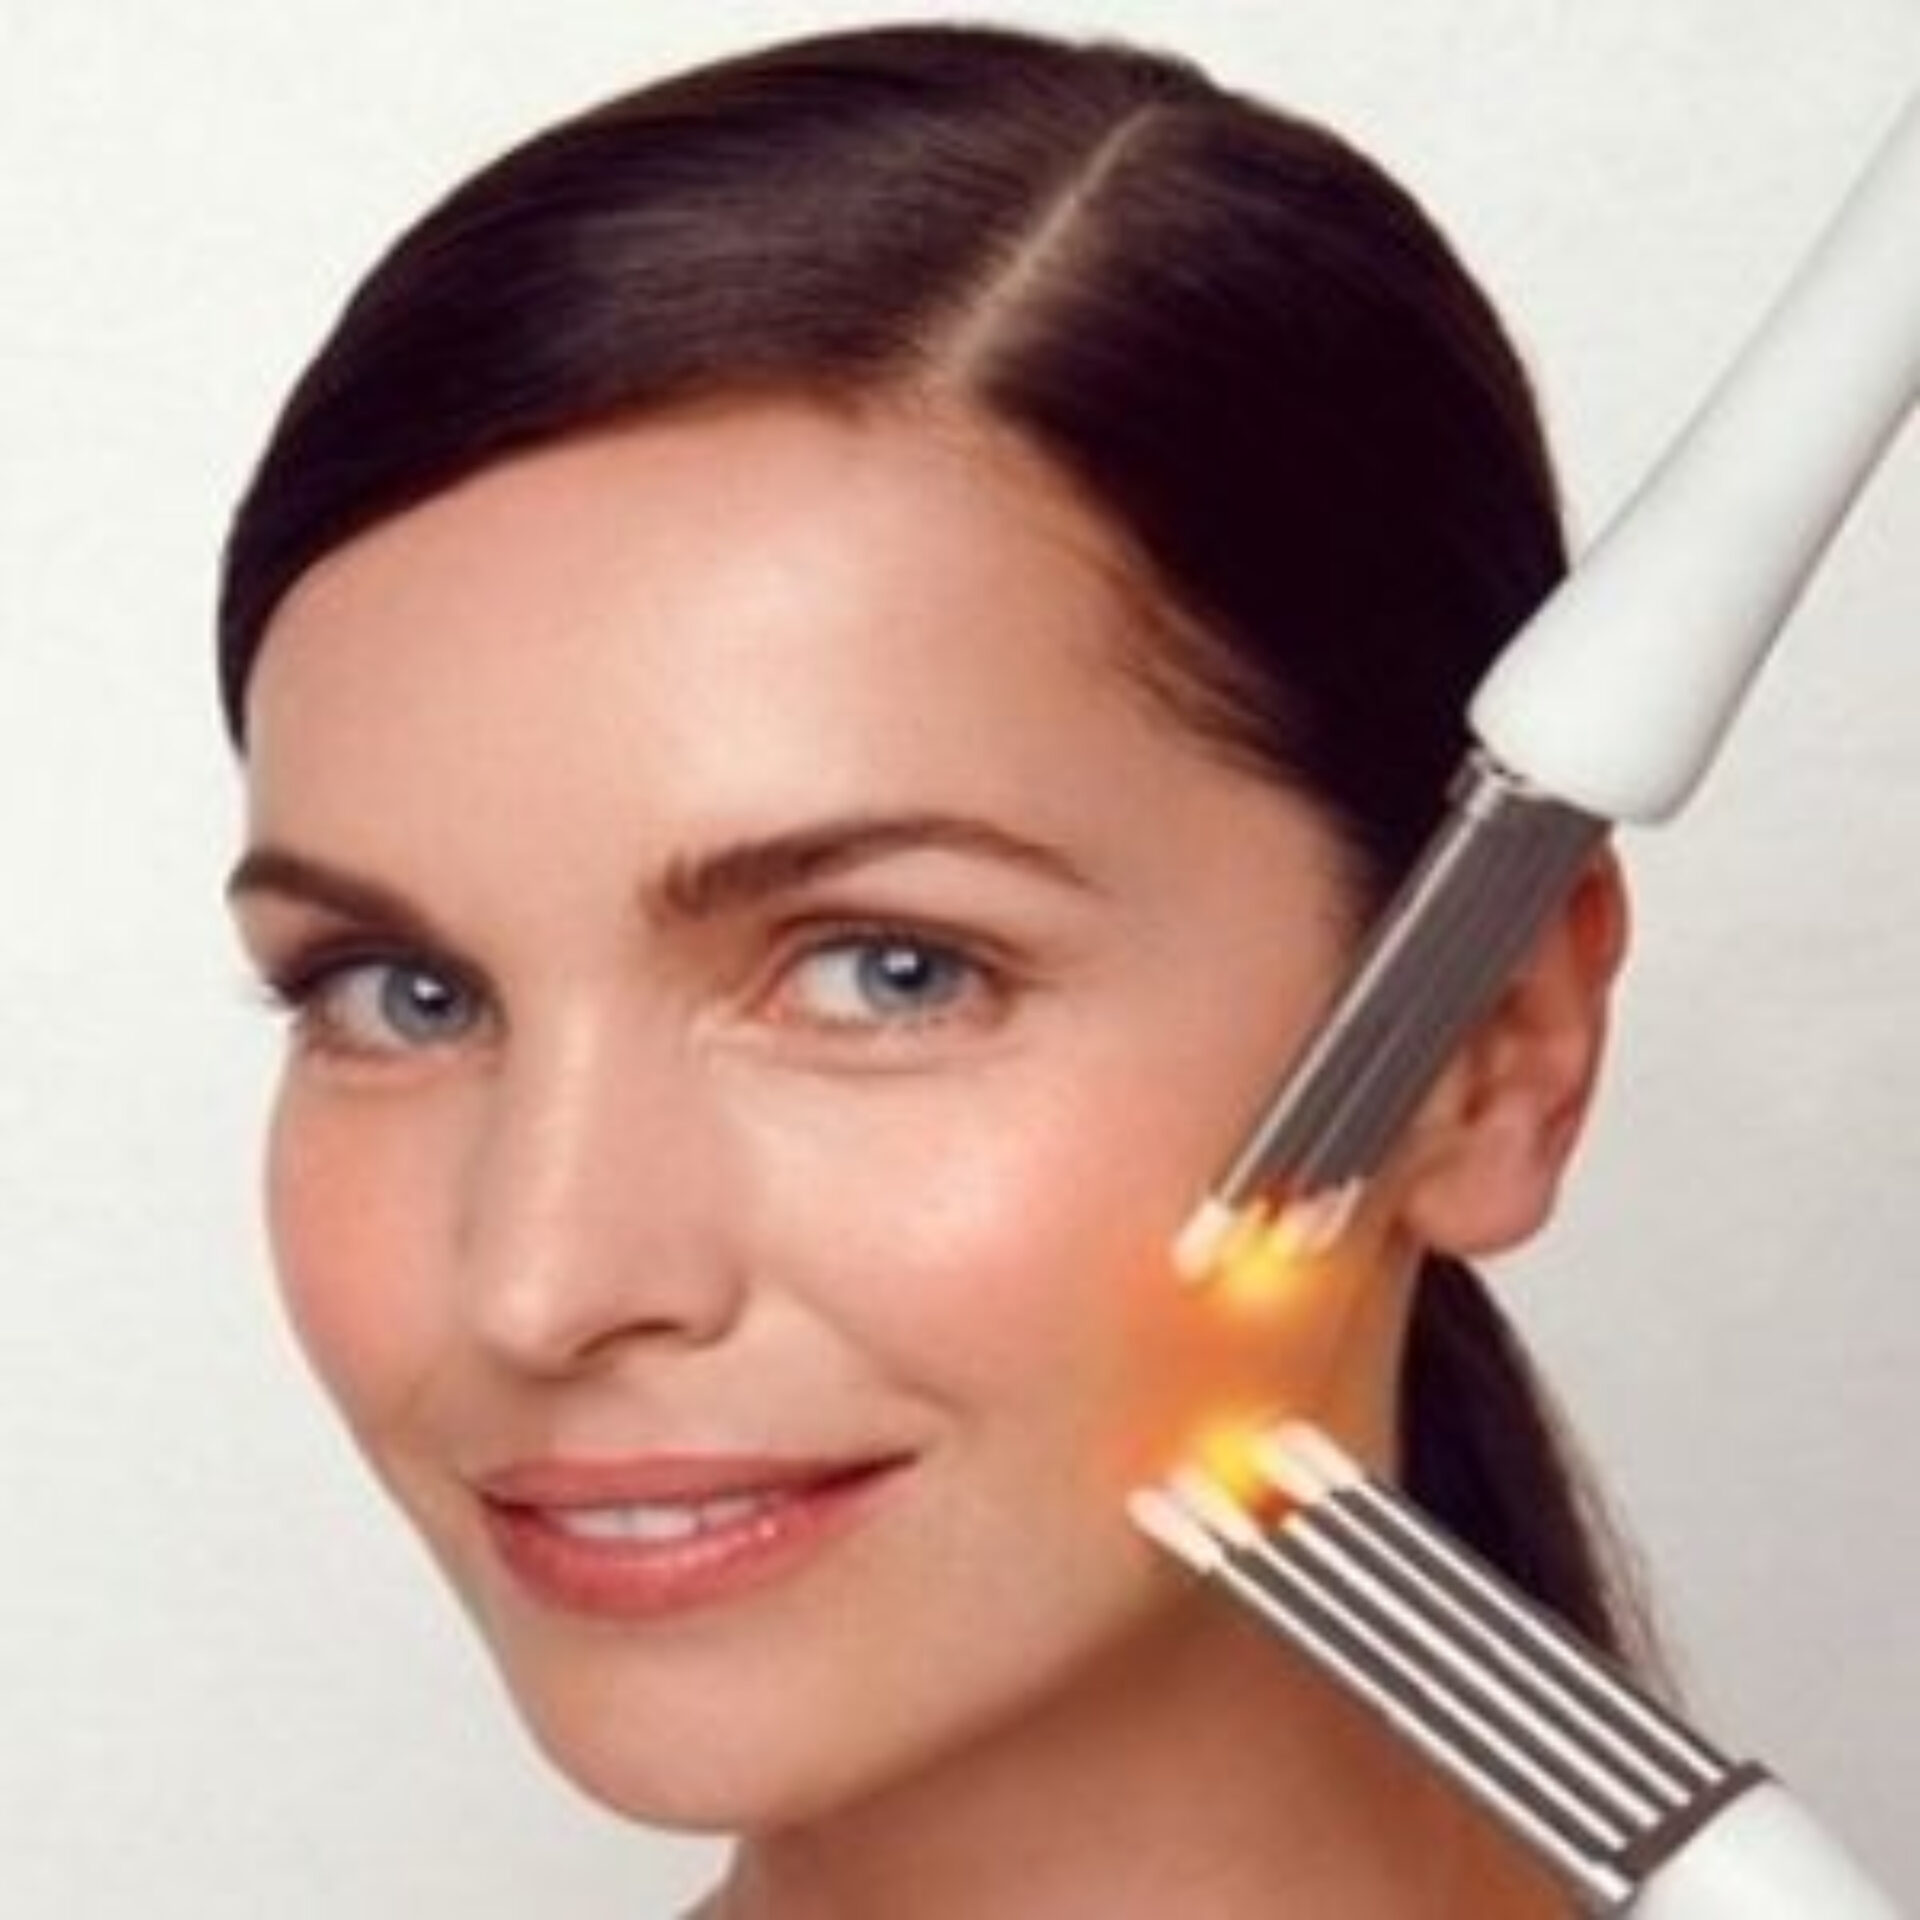 Non-Surgical Facial Treatments at Muse Beauty Salon, Worcestershire